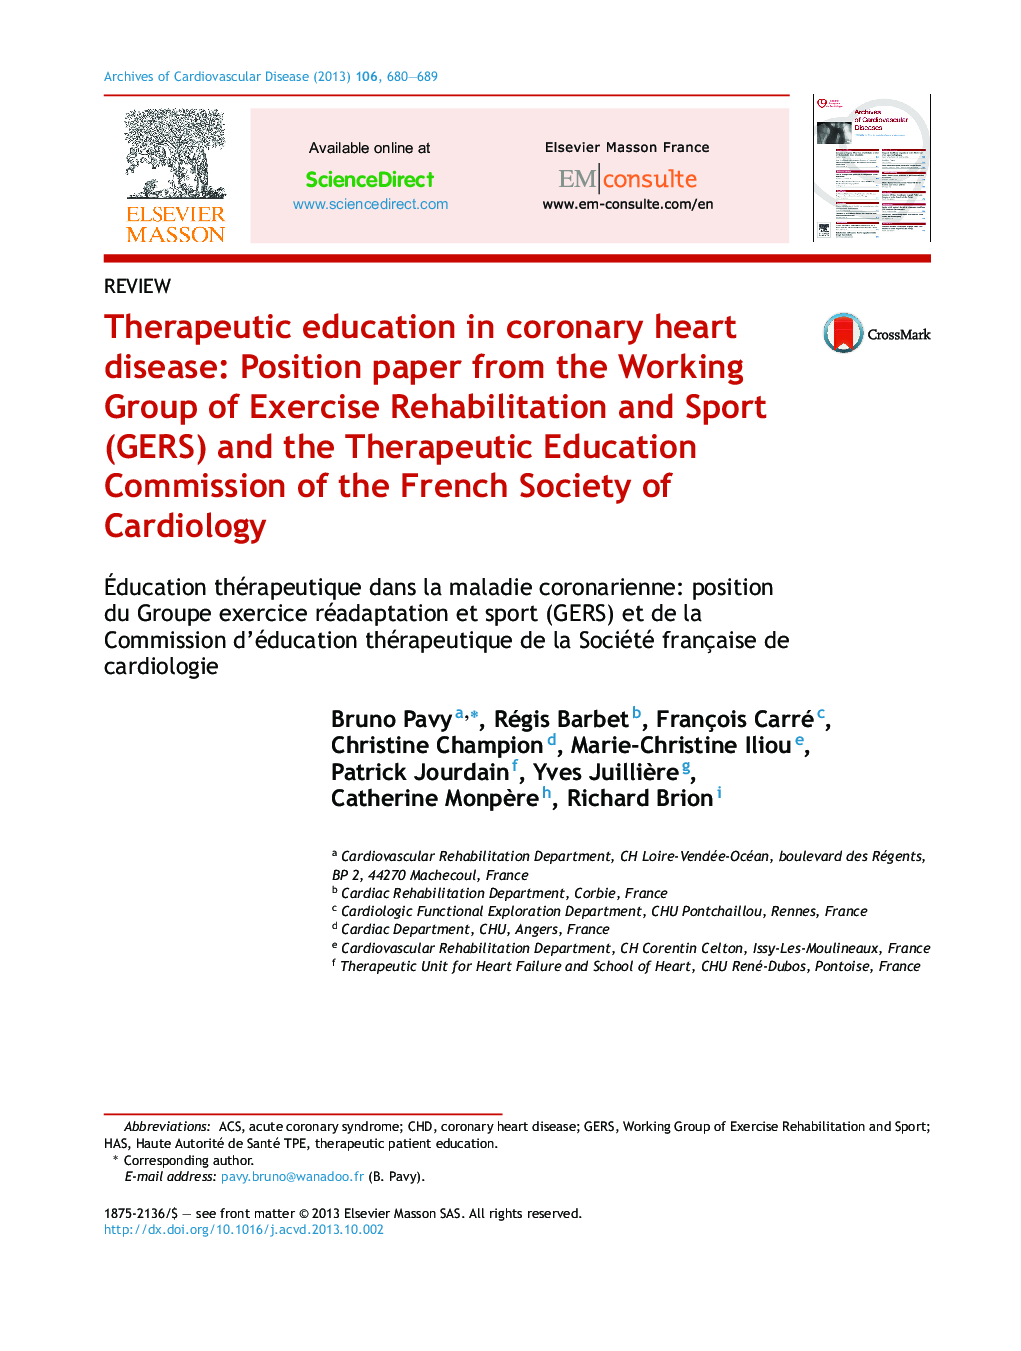 Therapeutic education in coronary heart disease: Position paper from the Working Group of Exercise Rehabilitation and Sport (GERS) and the Therapeutic Education Commission of the French Society of Cardiology